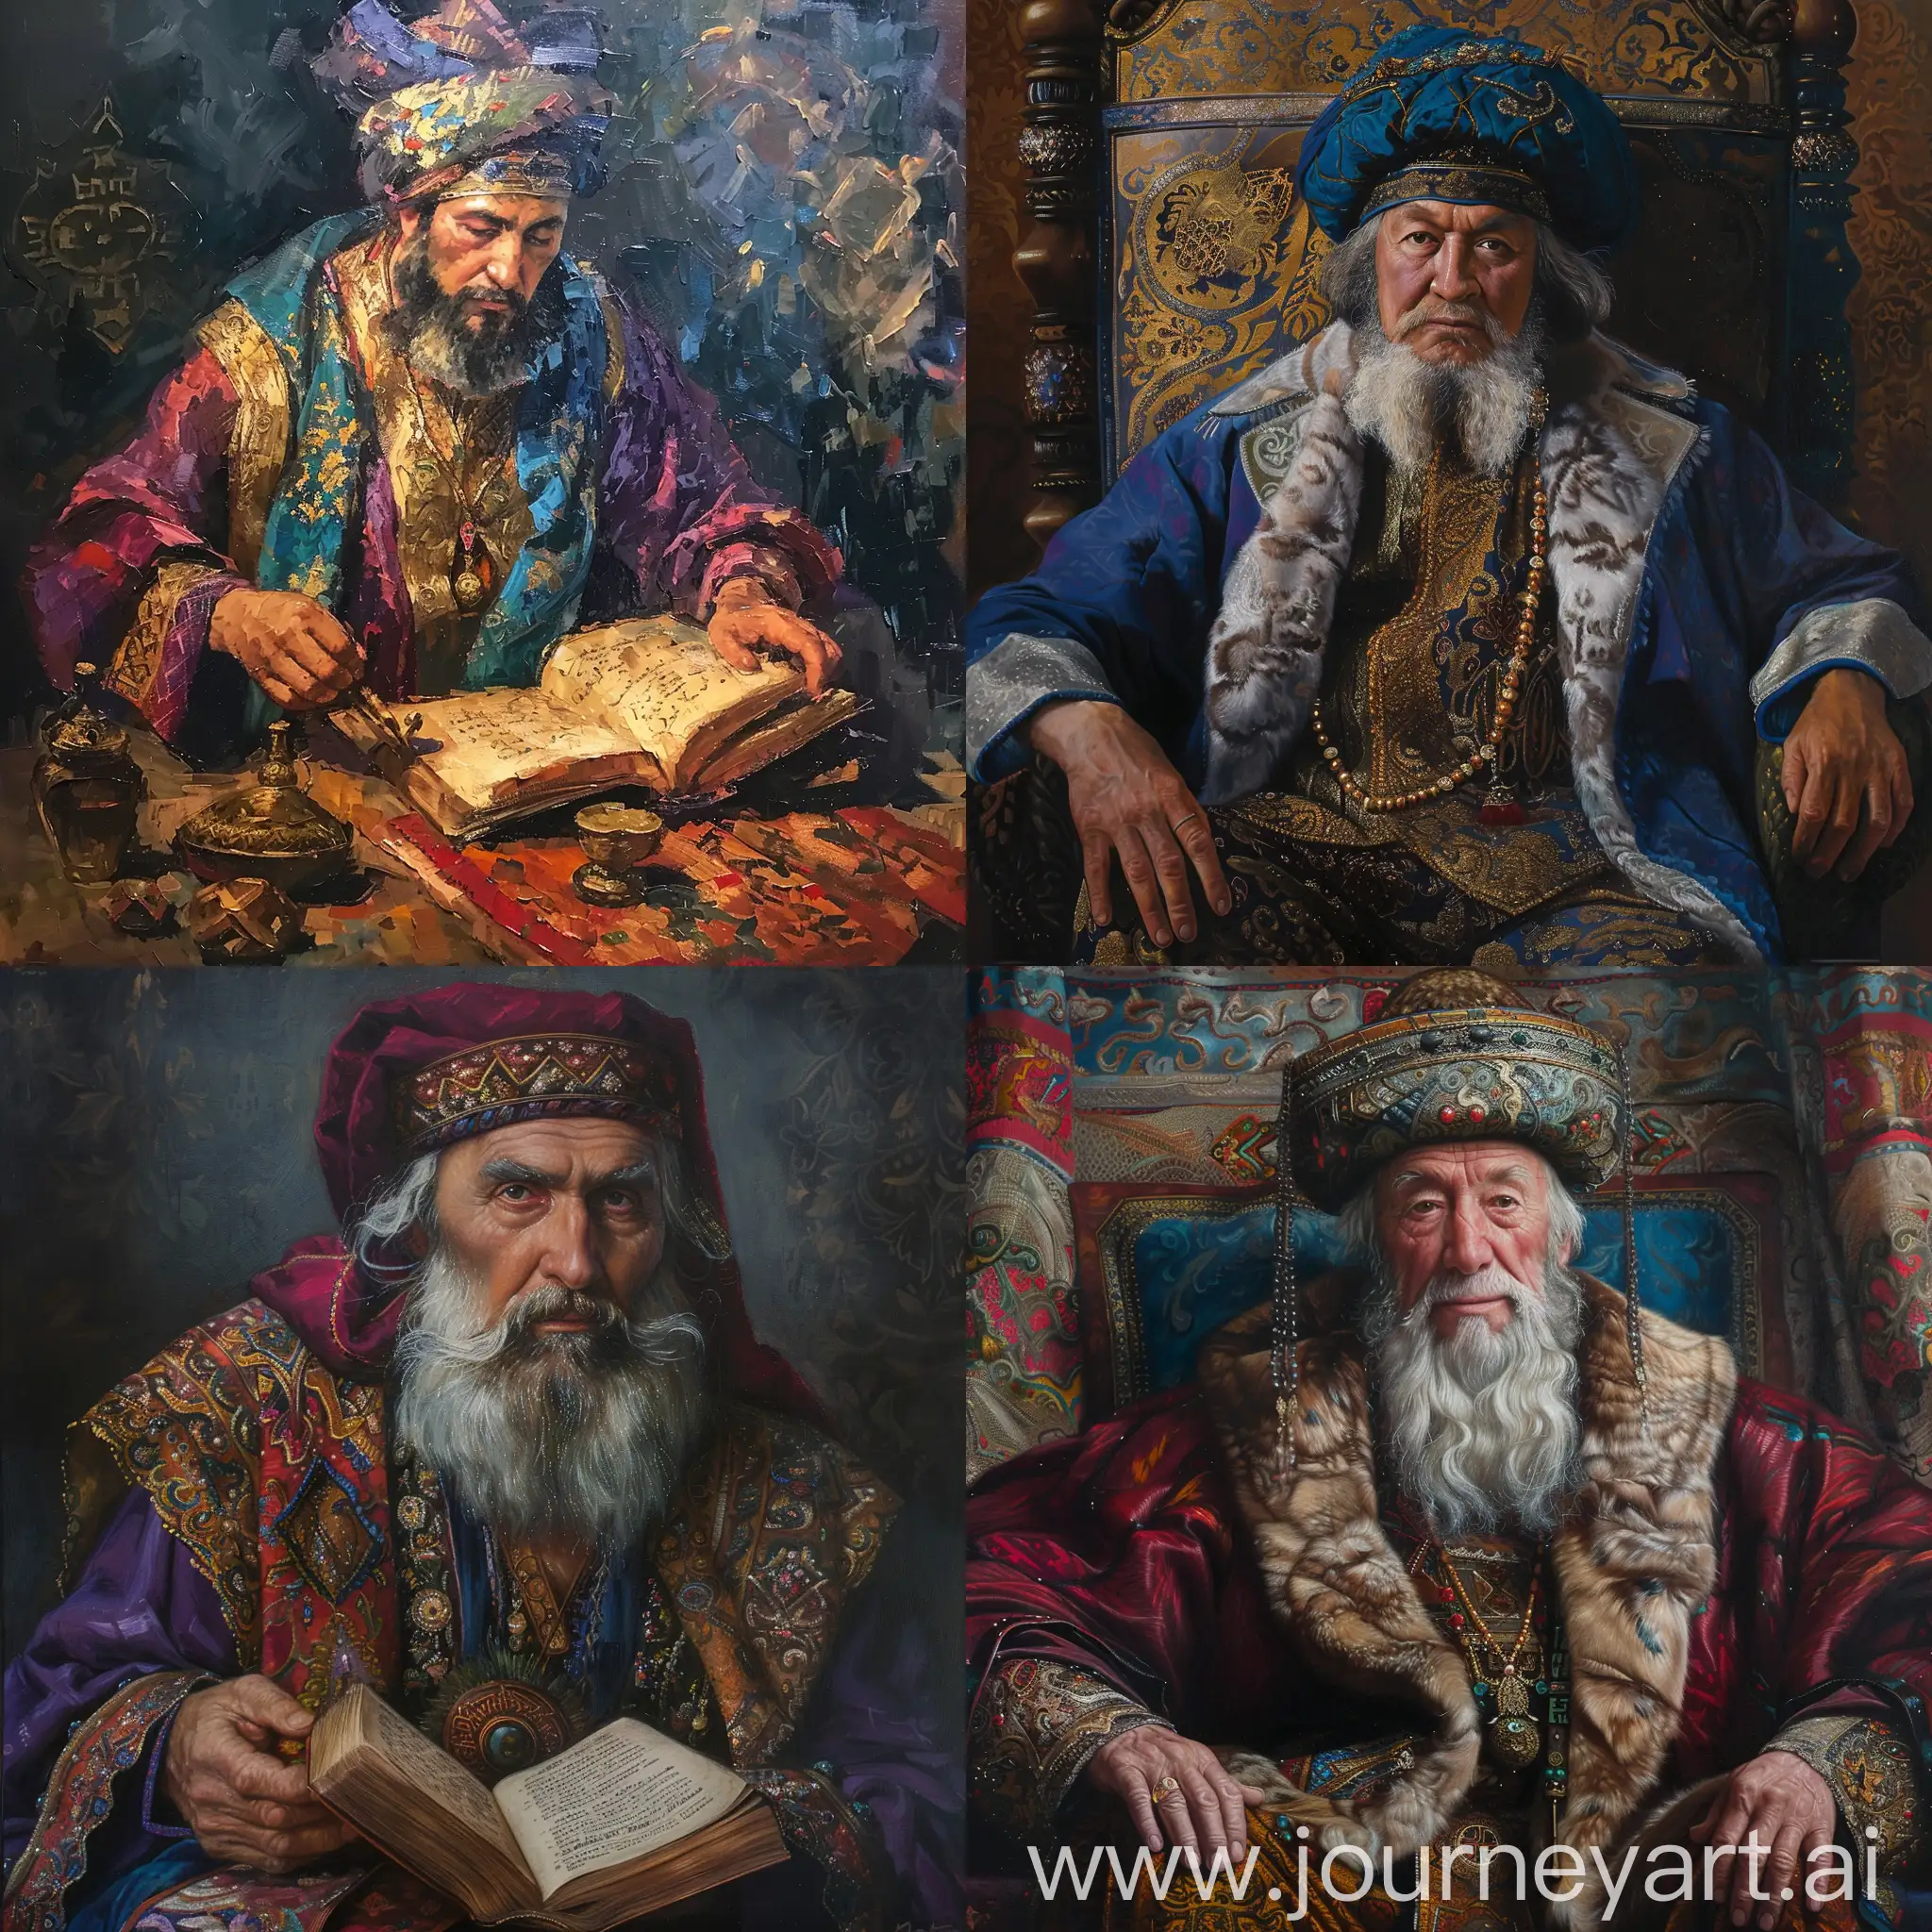 Kazakh sage became CEO and product manager, oil painting, renaissance style
